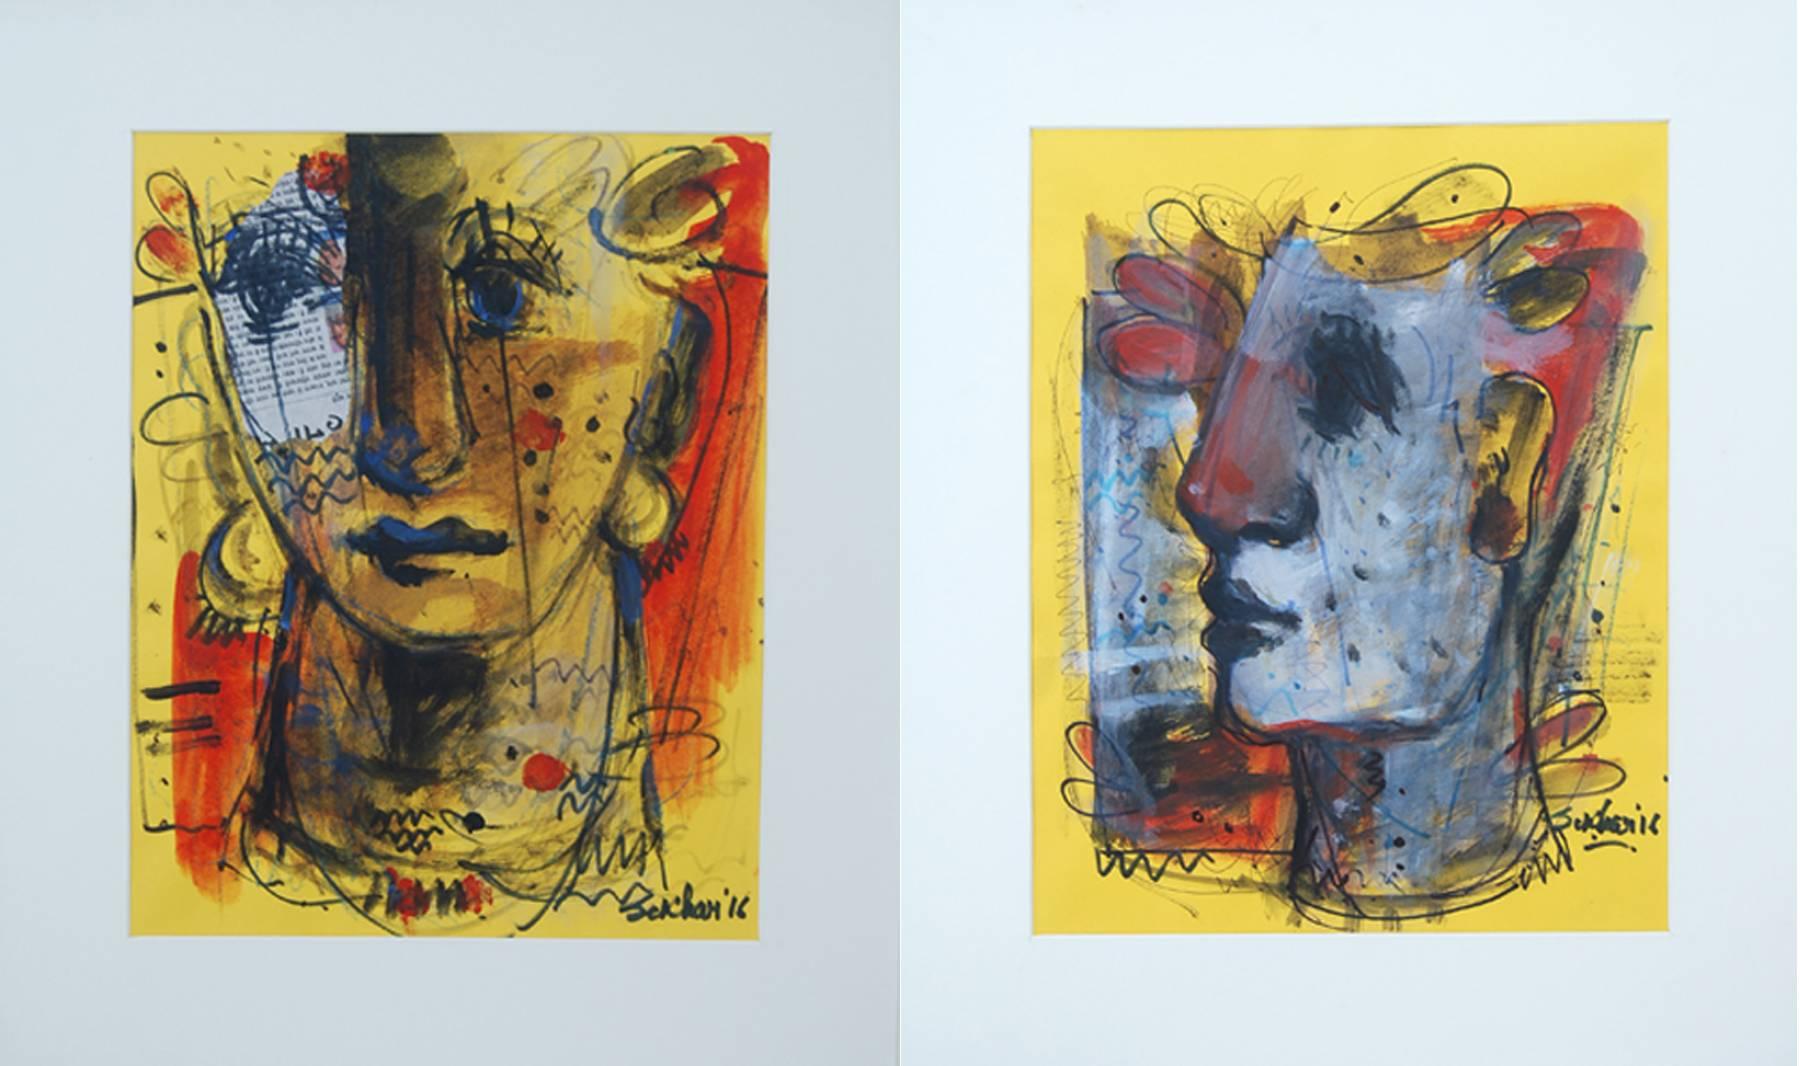 Man & Woman, Faces, Mixed Media, Red, Blue, Brown by Indian Artist "In Stock"